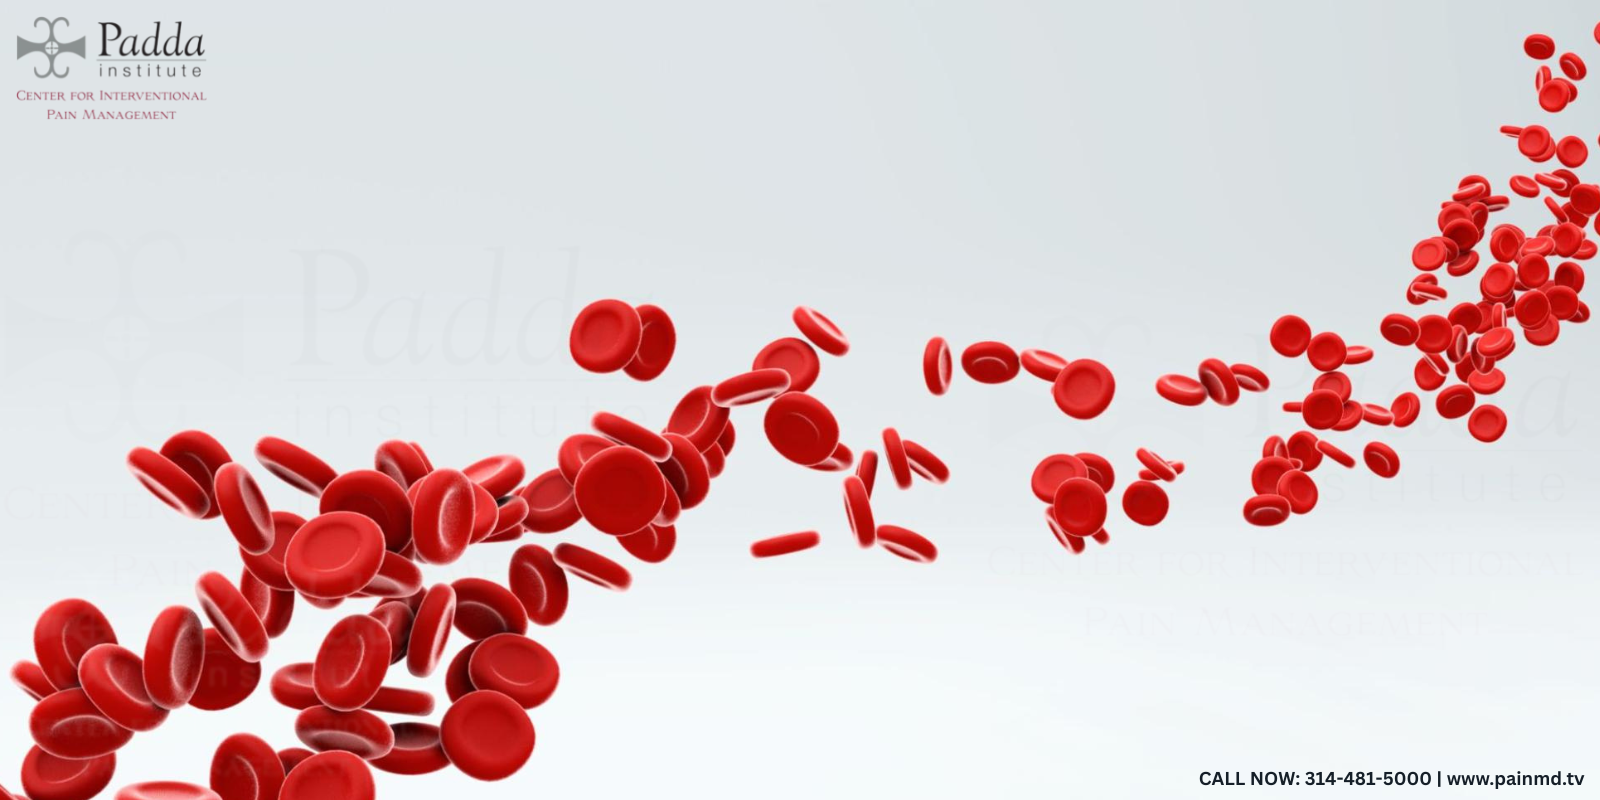 Blood Type May Help Predict Stroke Risk